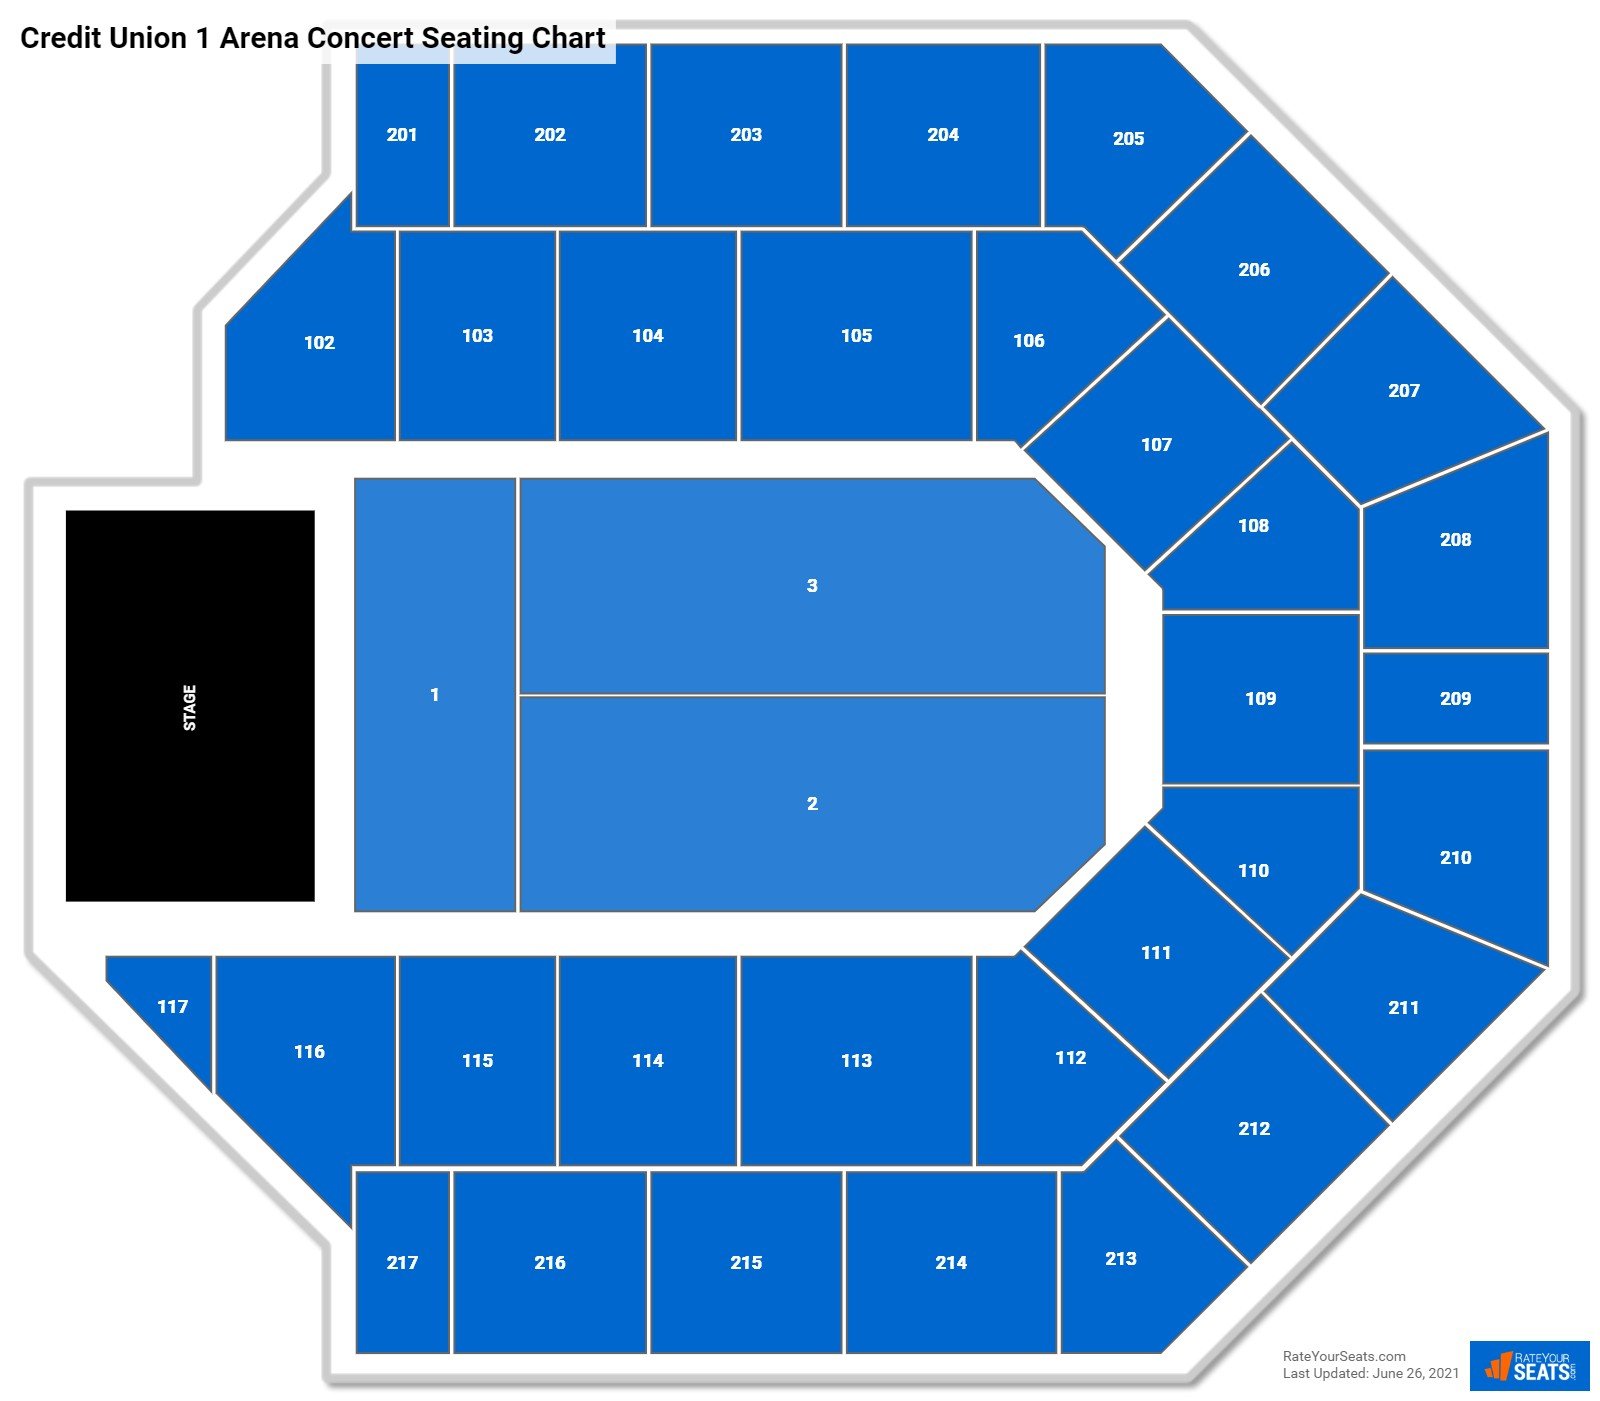 Credit Union 1 Arena Concert Seating Chart